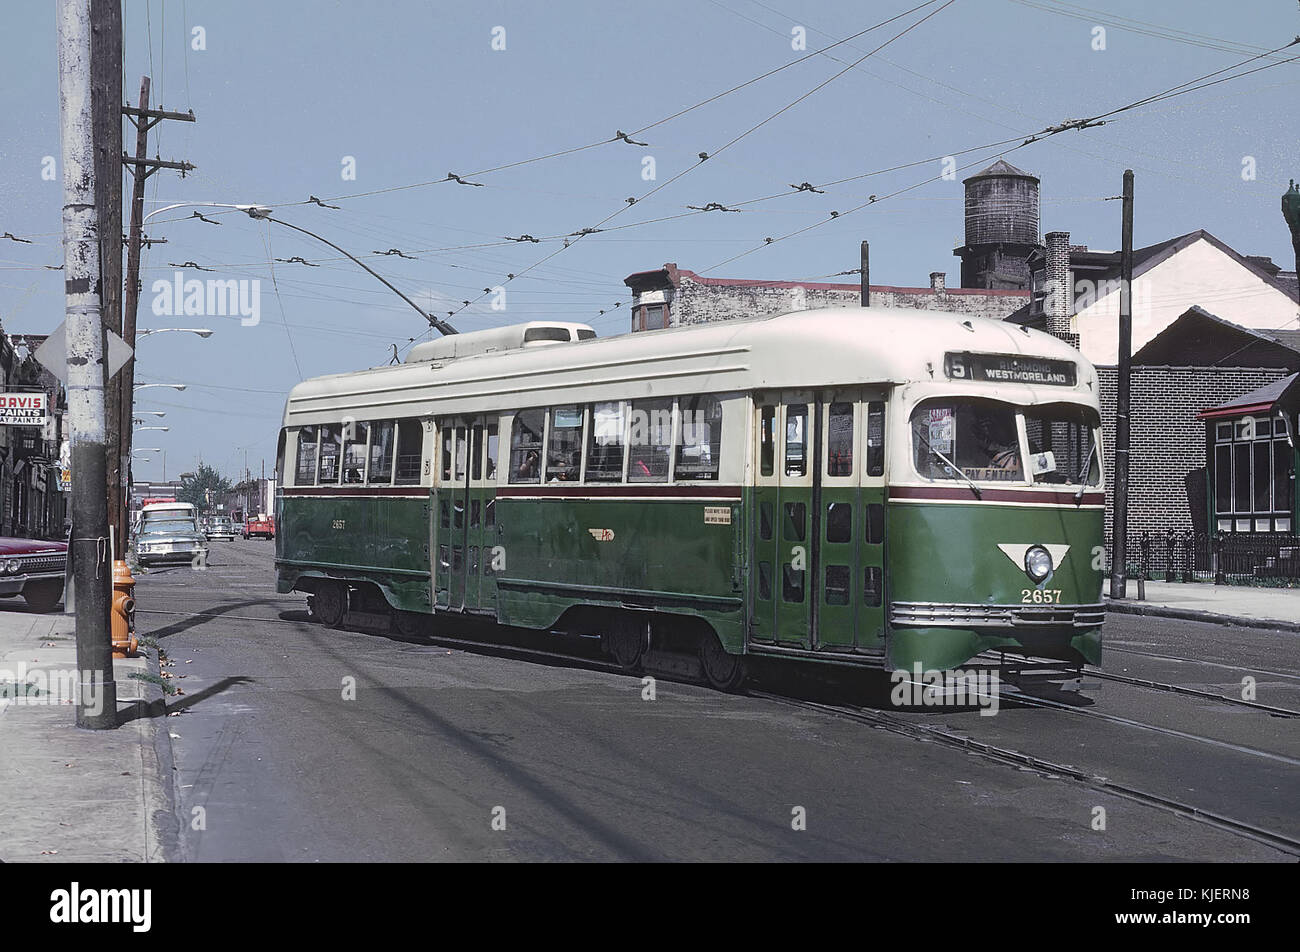 PTC 2657 (PCC) a 15 RICHMOND WEST MORELAND car turning onto Allegheny Ave. from Girard Ave in Philadelphia, PA on September 2, 1965 (22503863670) Stock Photo